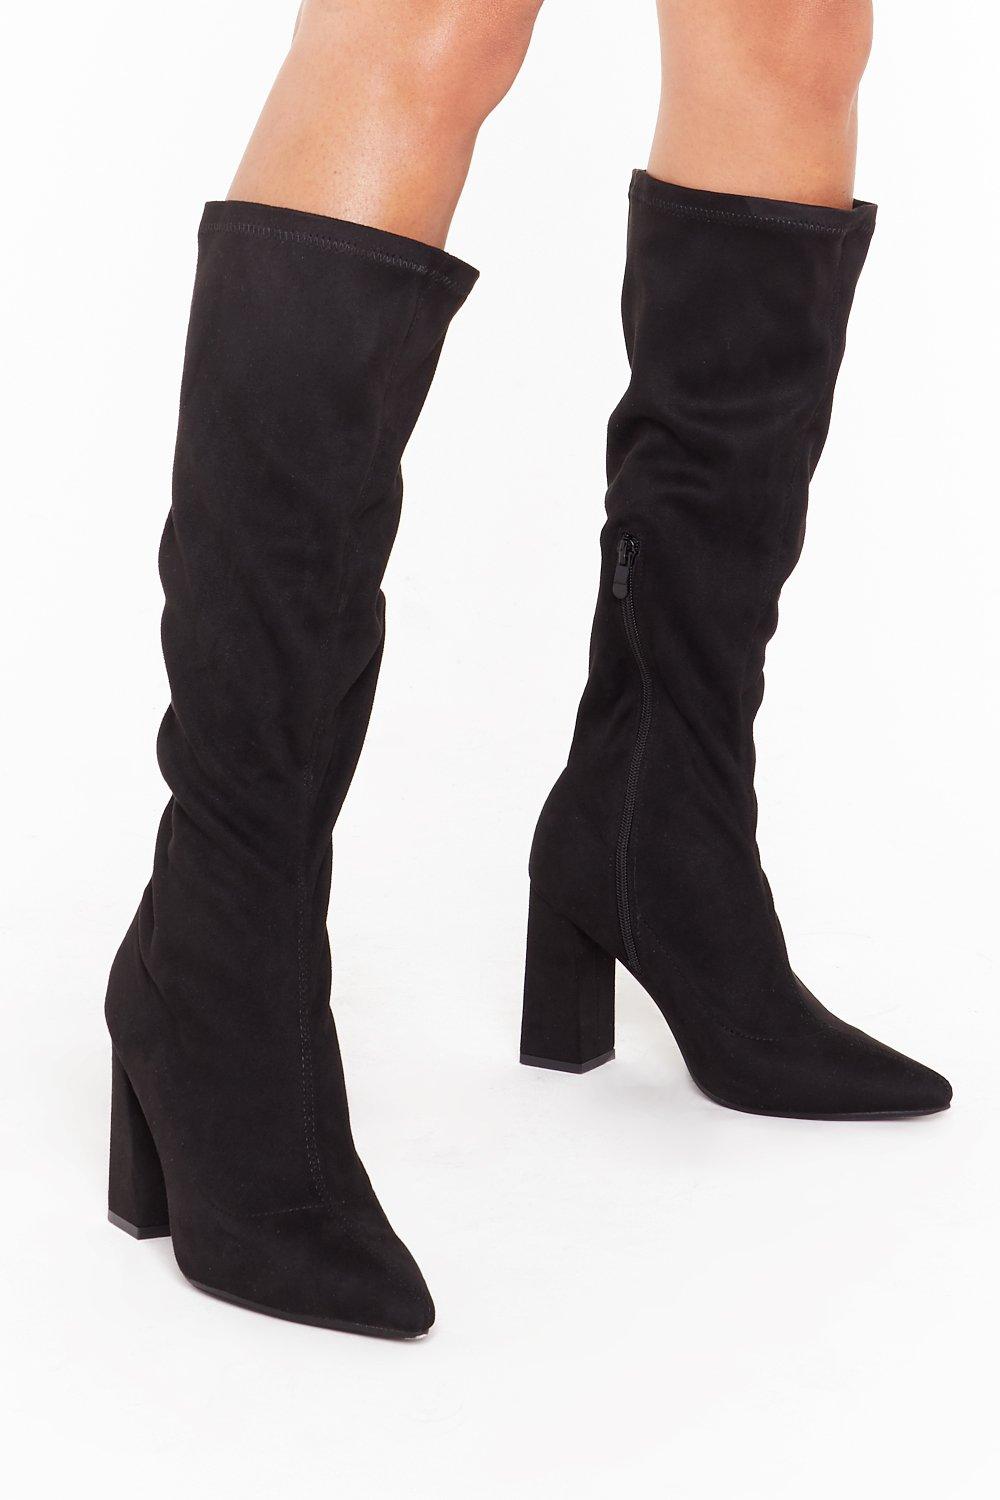 boots suede knee high